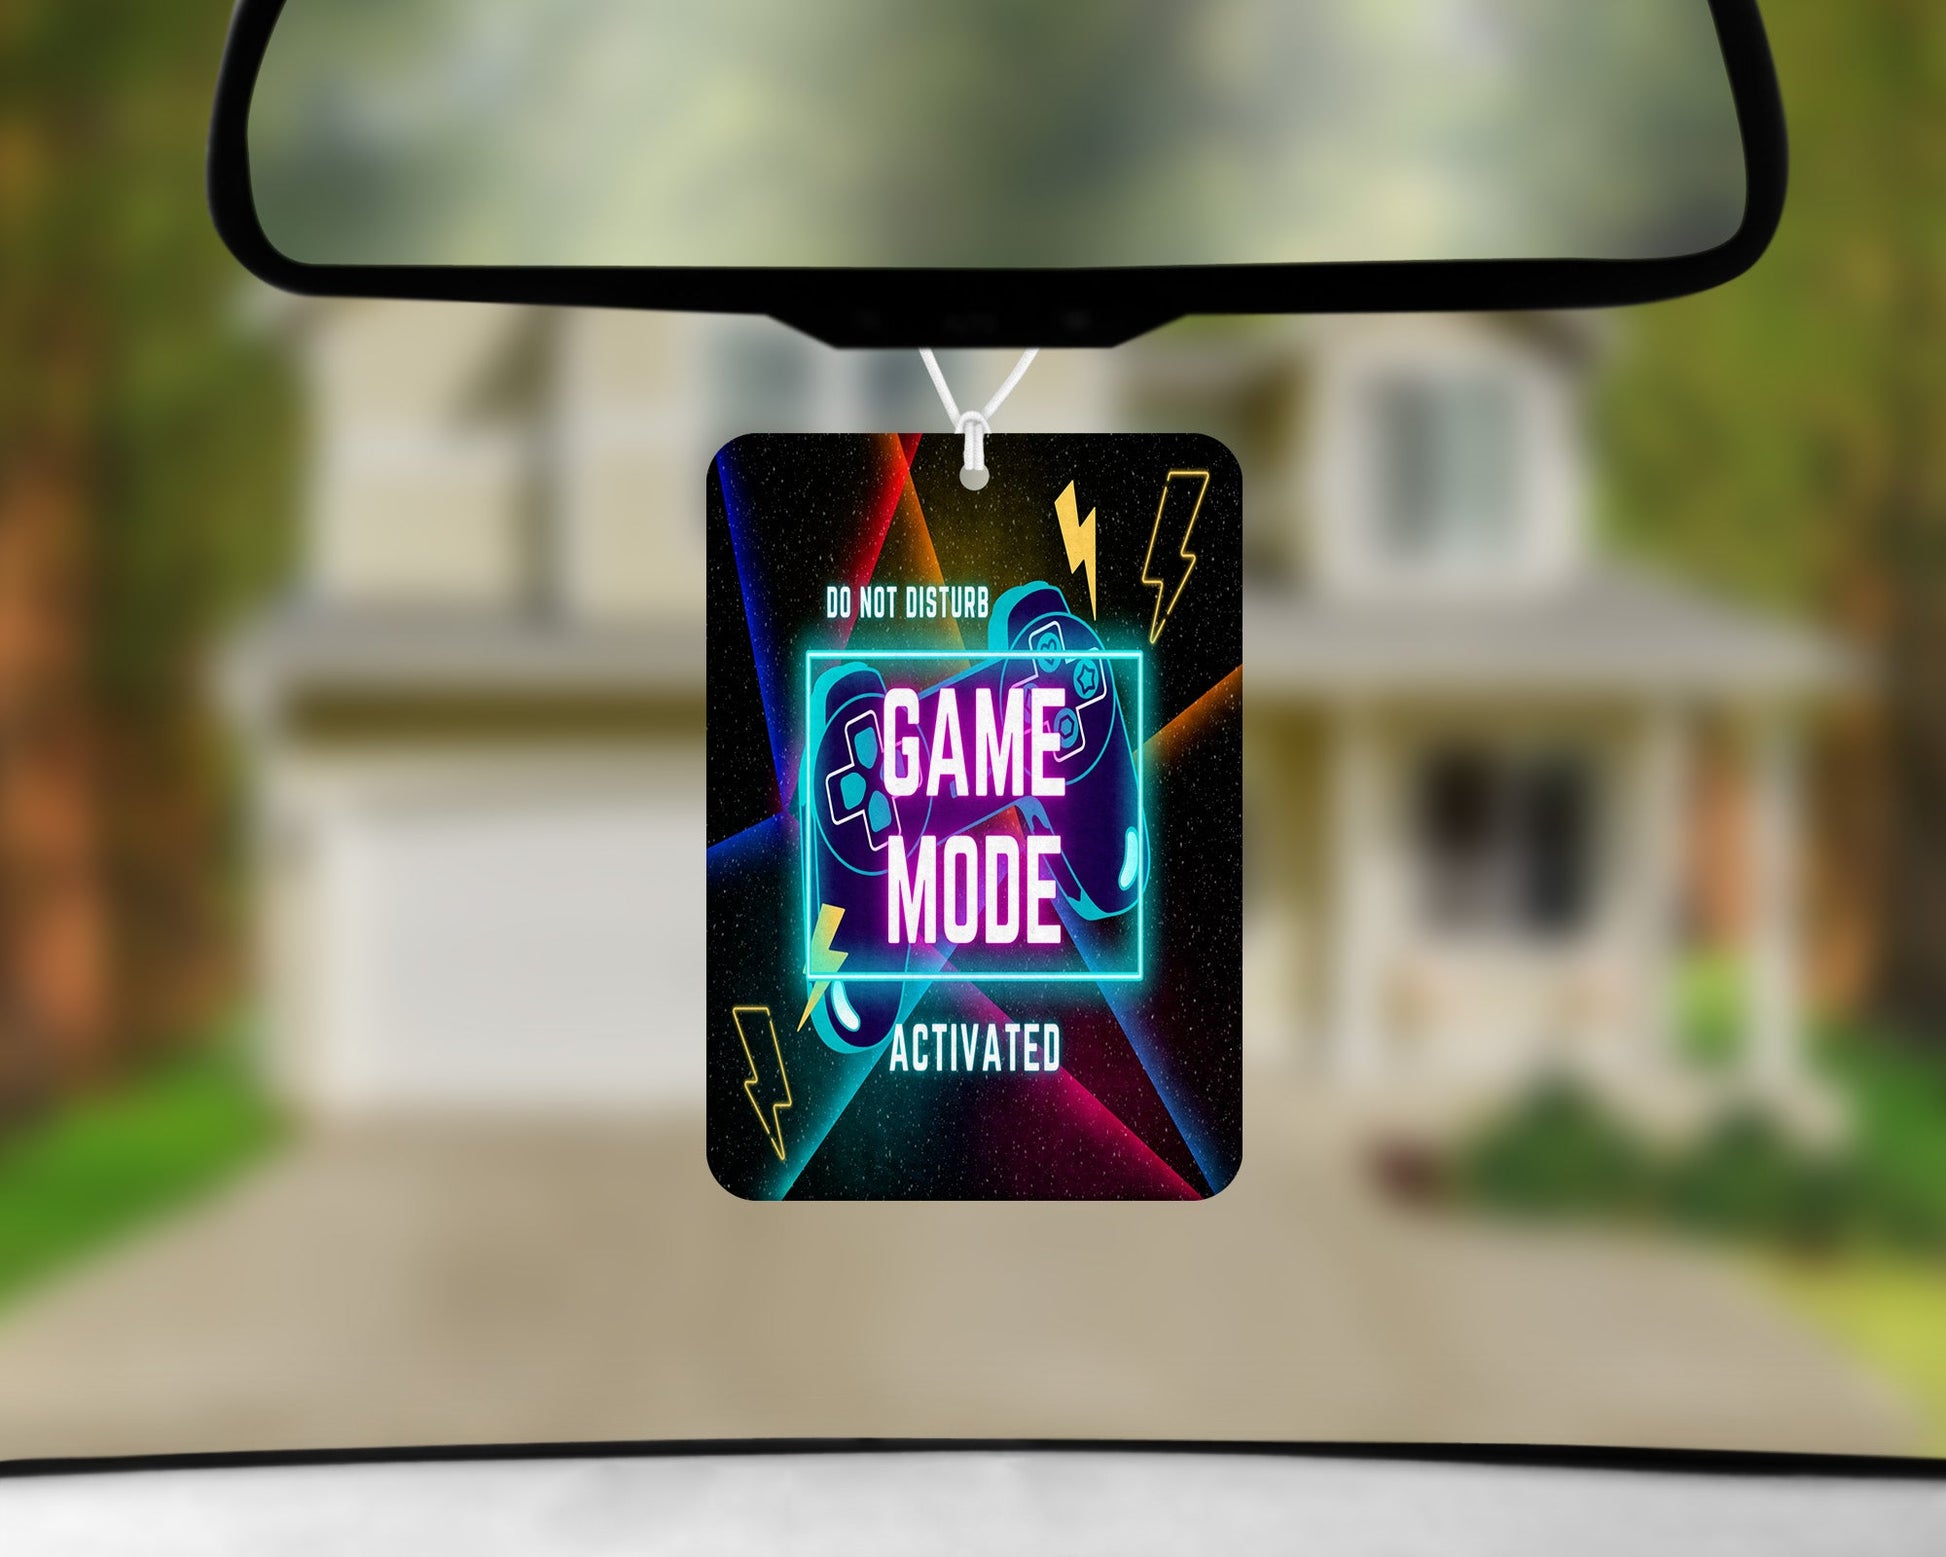 Game Mode Activated|Freshie|Includes Scent Bottle - Vehicle Air Freshener